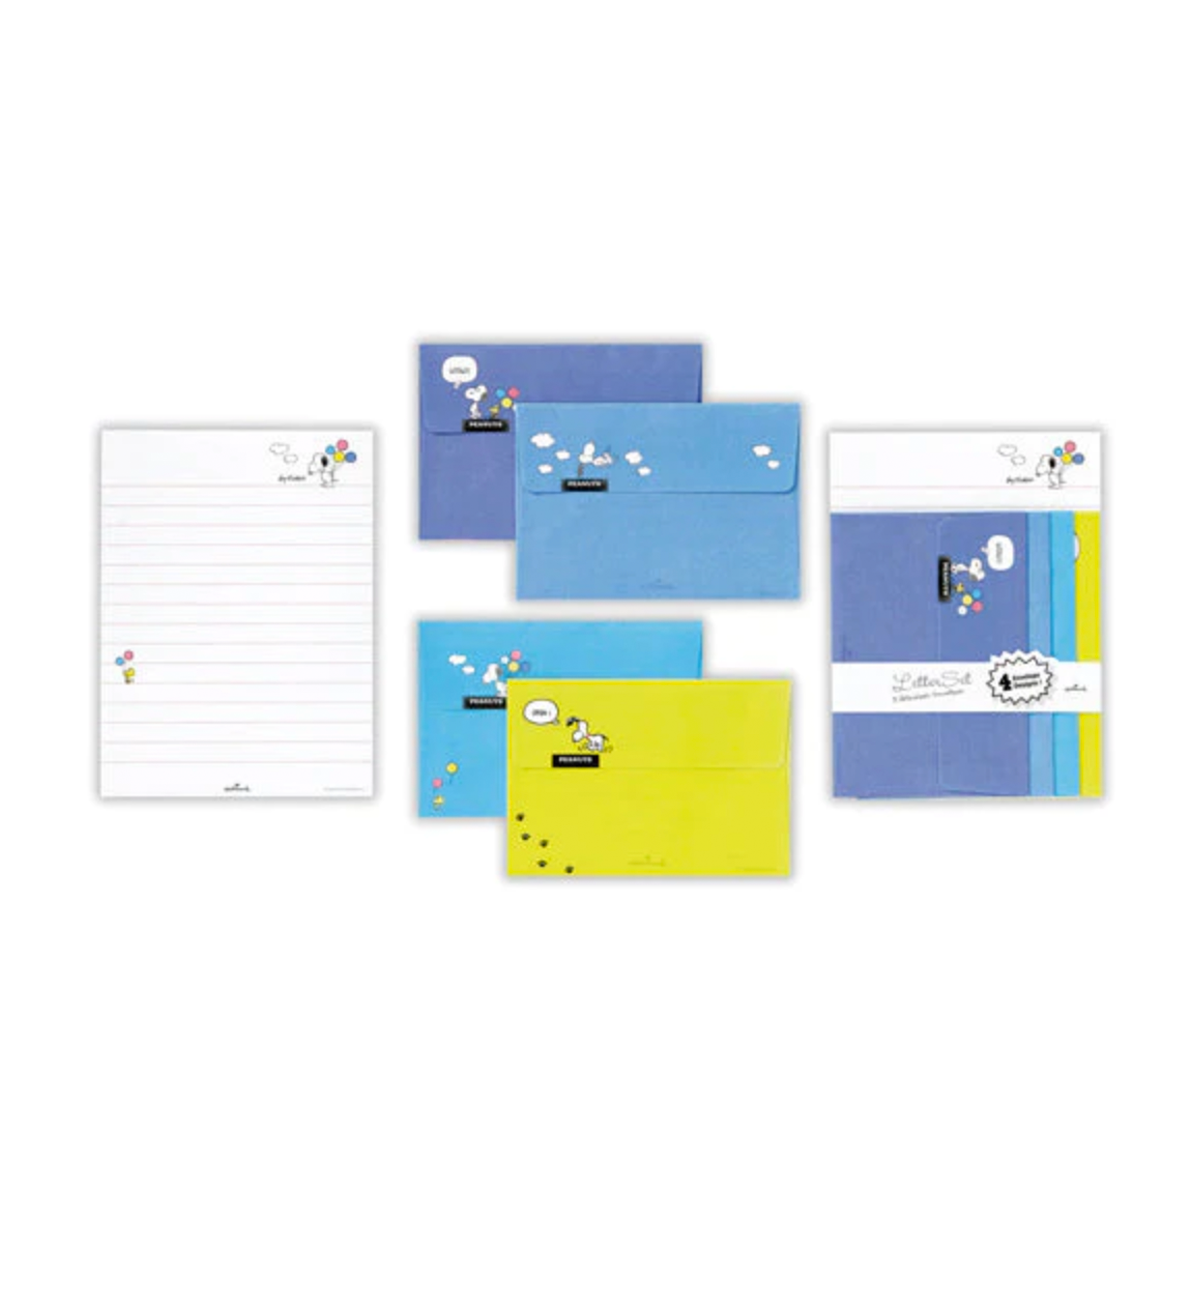 Peanuts Snoopy Letter Set [Cool]